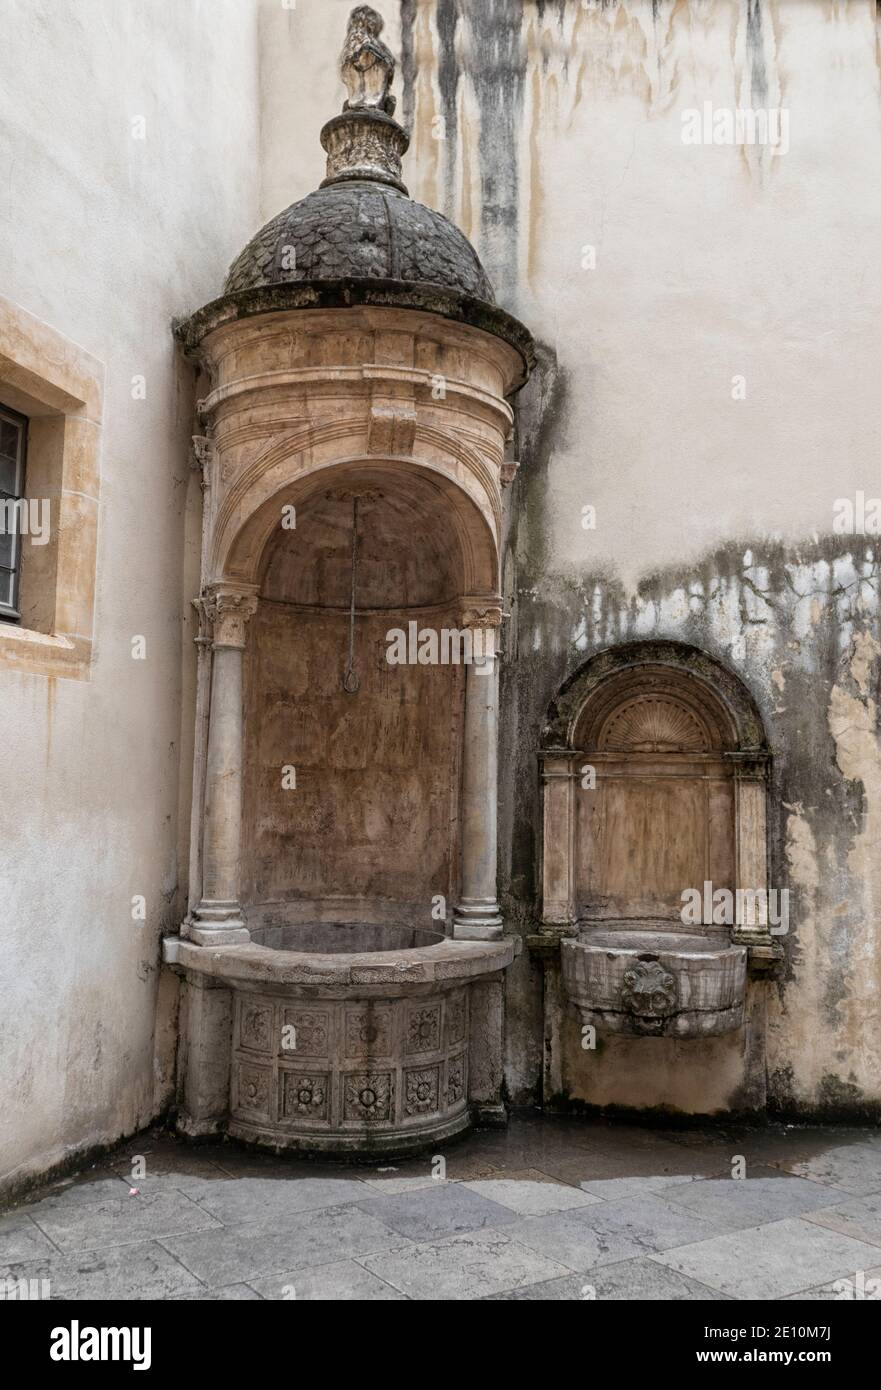 Medieval well in a courtyard in Vieux Lyon, France Stock Photo